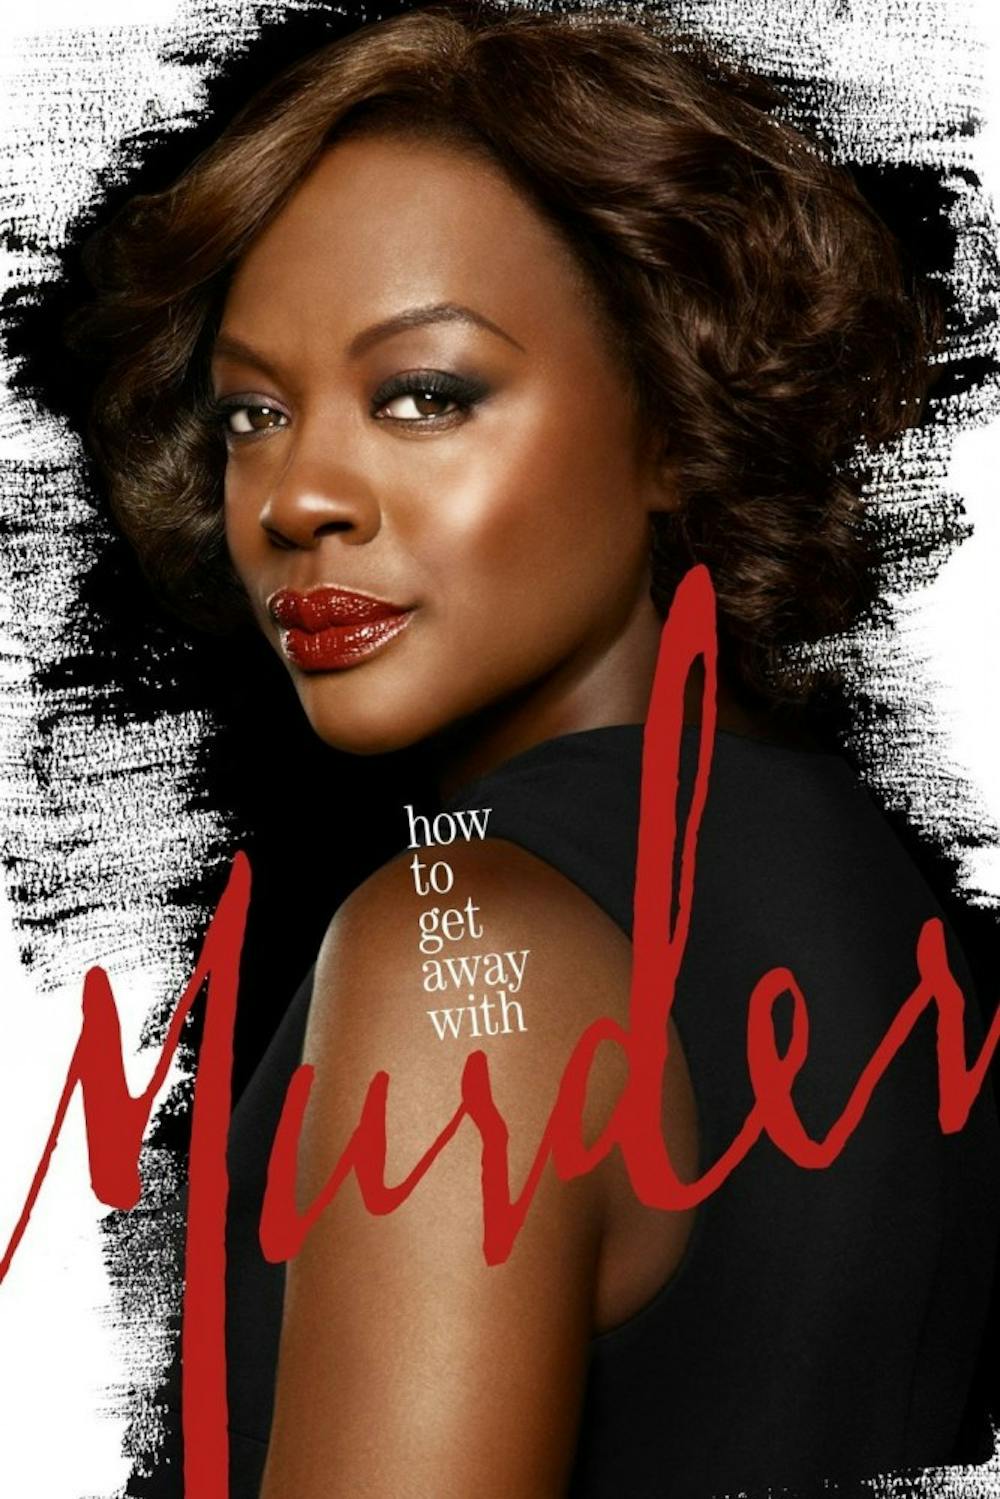 Review: "How to Get Away with Murder" Season 3 Premiere